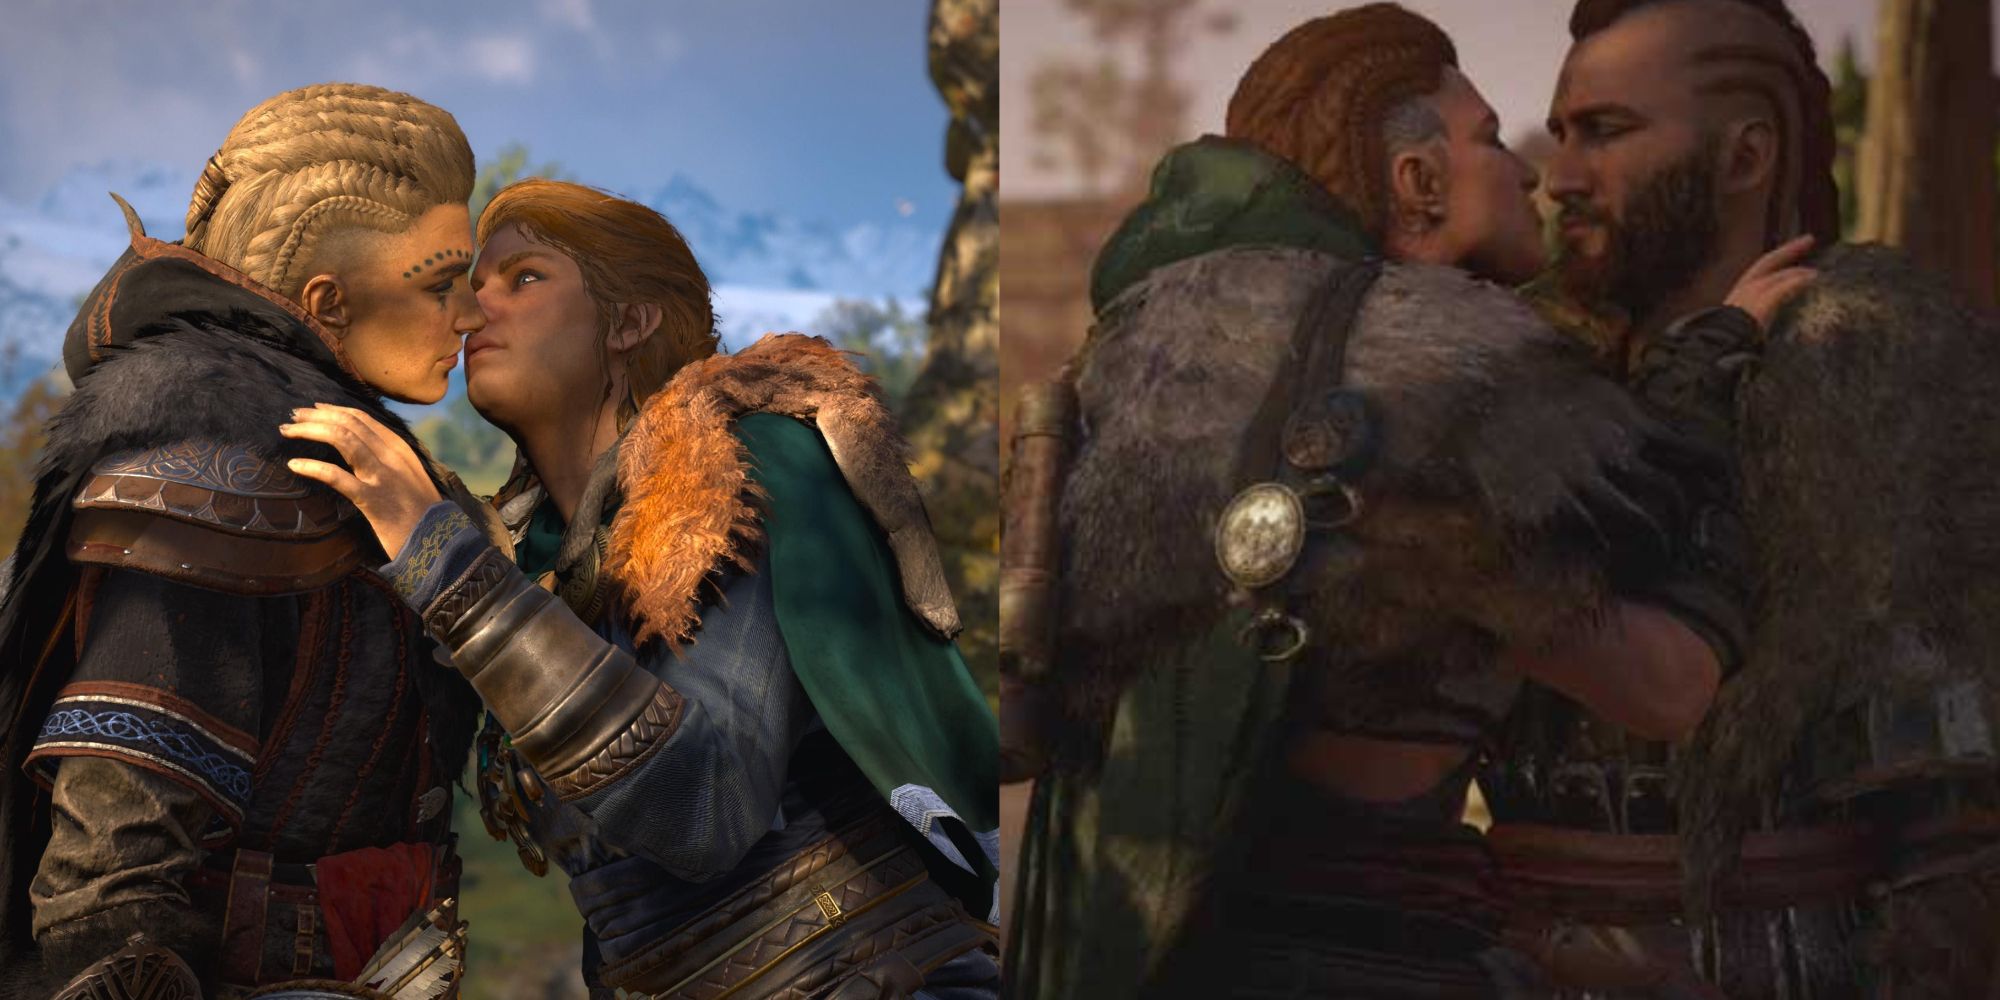 Assassin's Creed Valhalla: Every Romance Option, Ranked Worst To Best